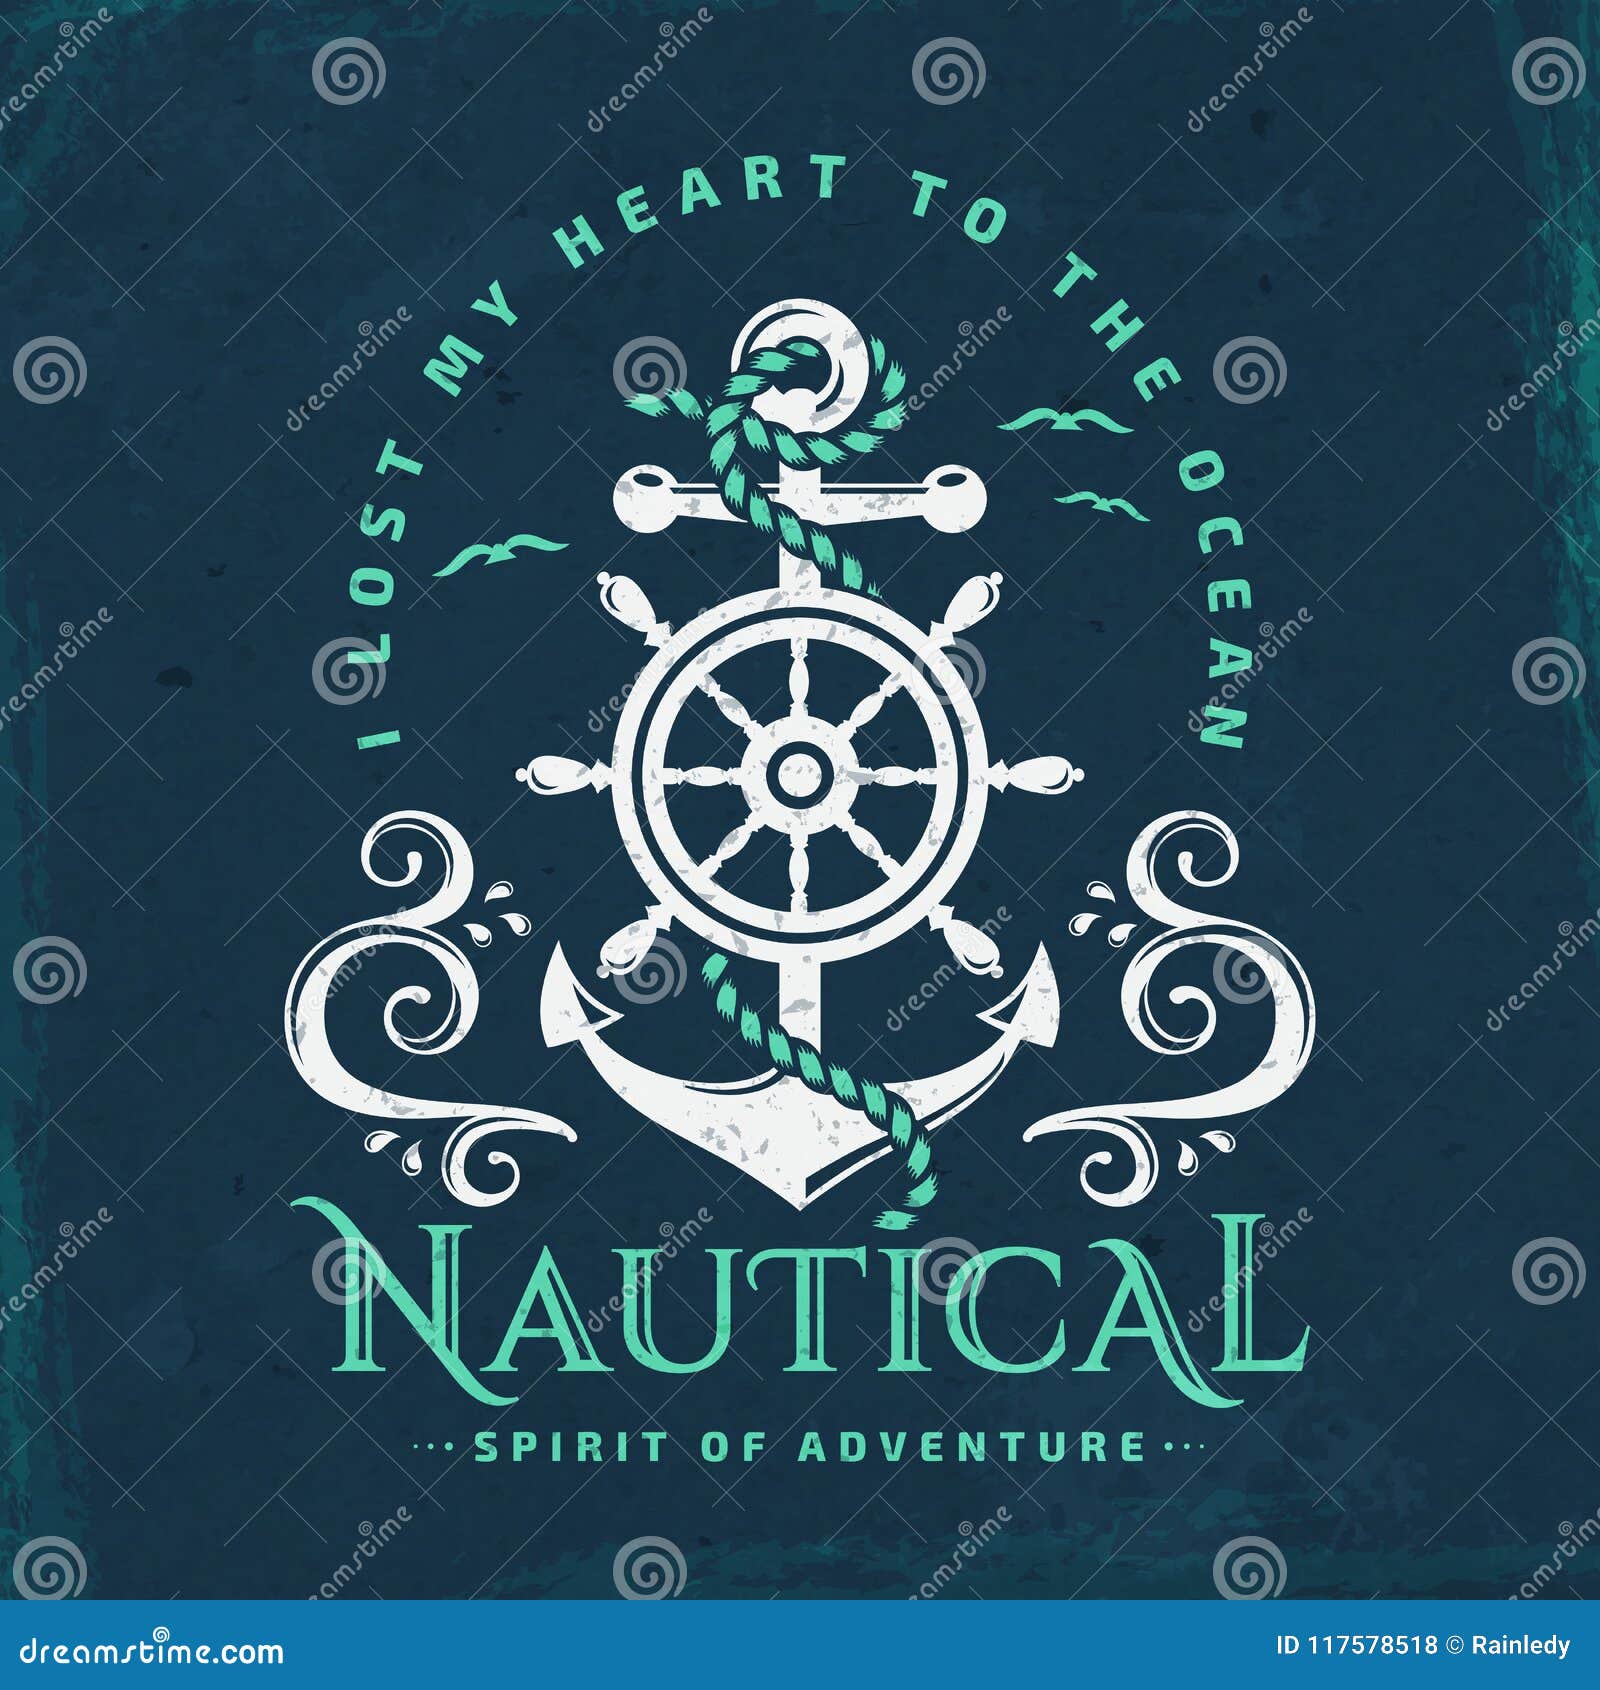 nautical emblem with anchor, steering wheel and waves.